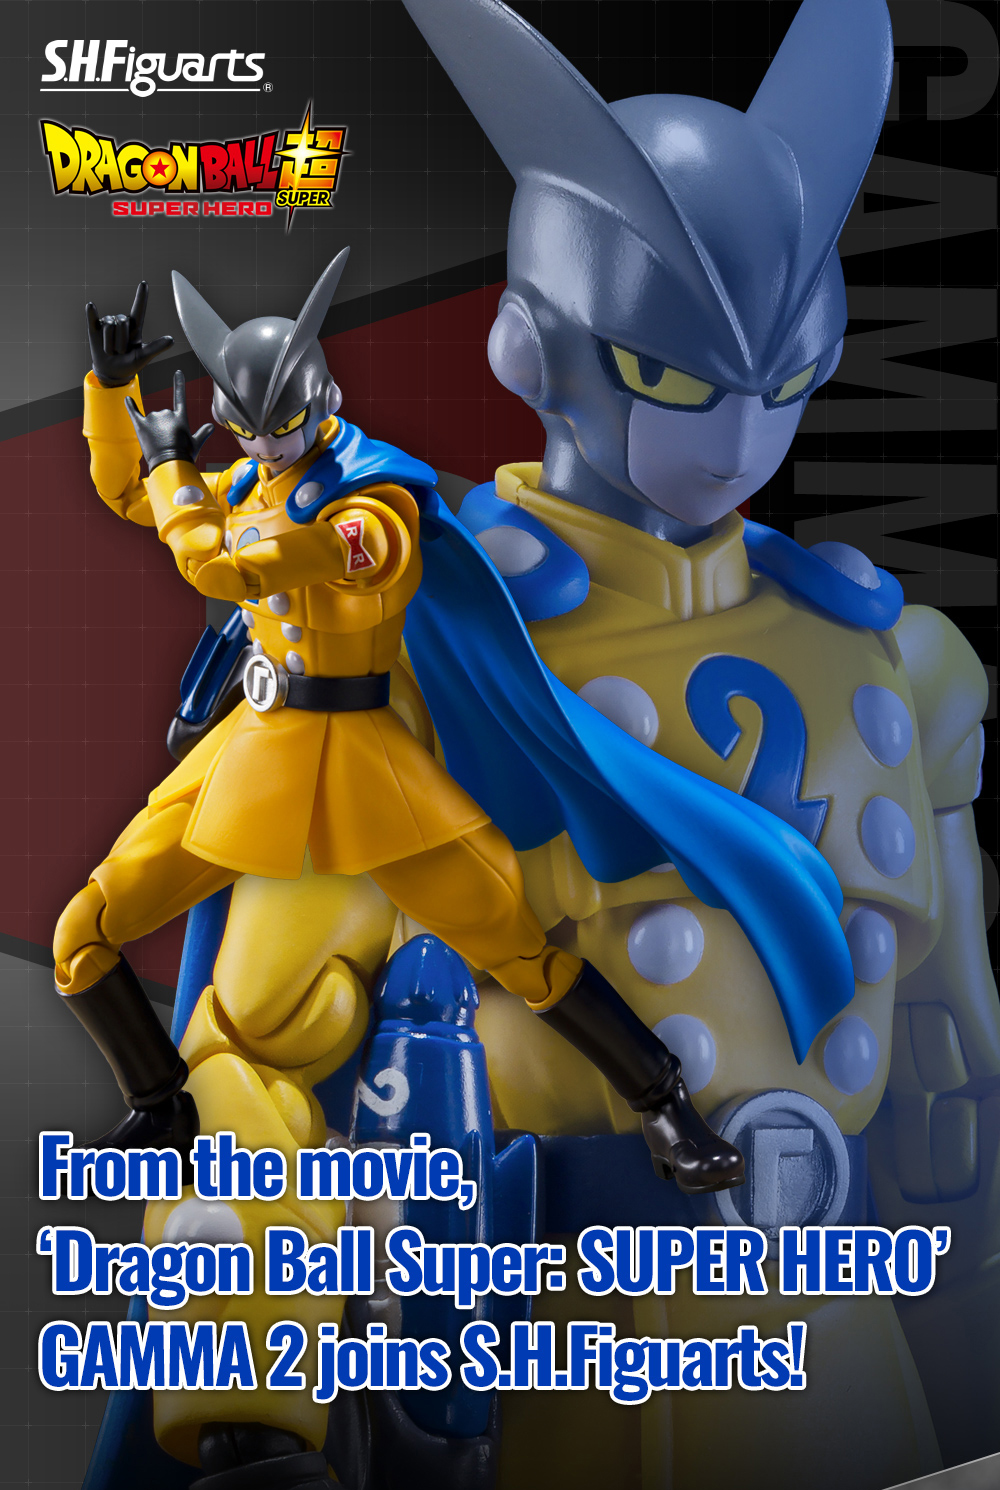 From the movie, ‘Dragon Ball Super: SUPER HERO’ GAMMA 2 joins S.H.Figuarts!